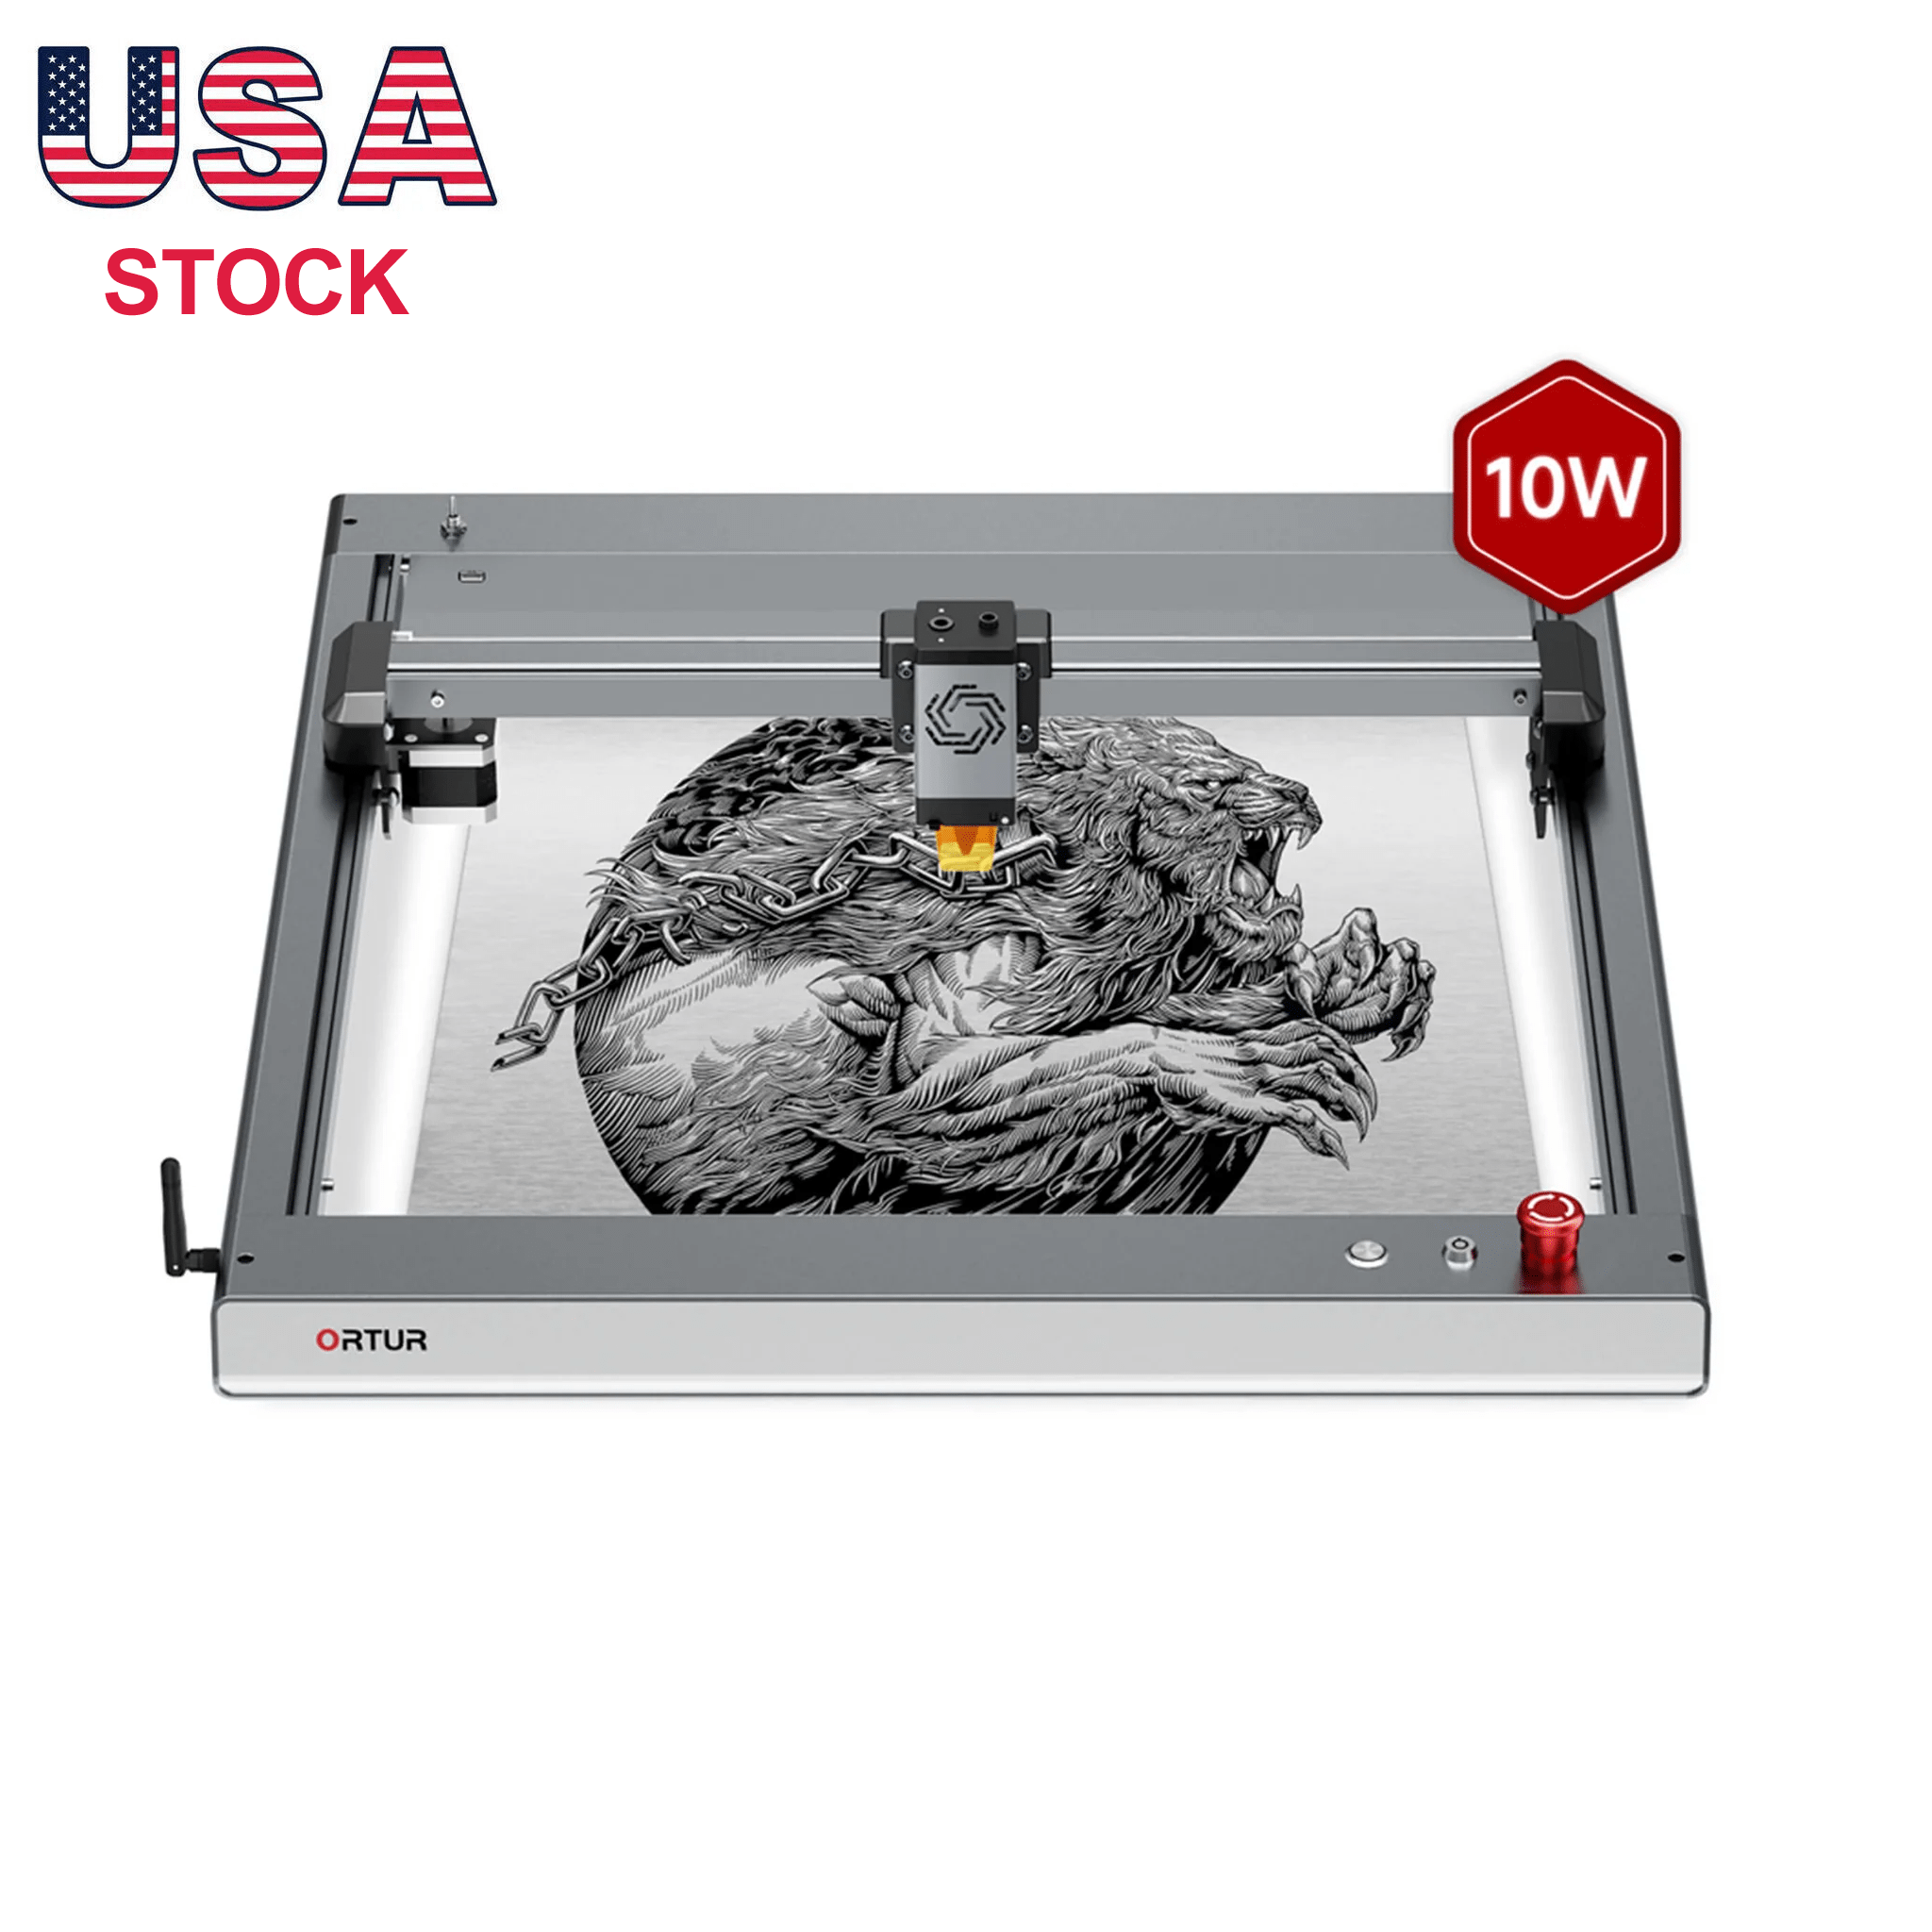 Ortur Laser Master 3 detailed review  Powerful, fast engraver & cutter -  The Technology Man